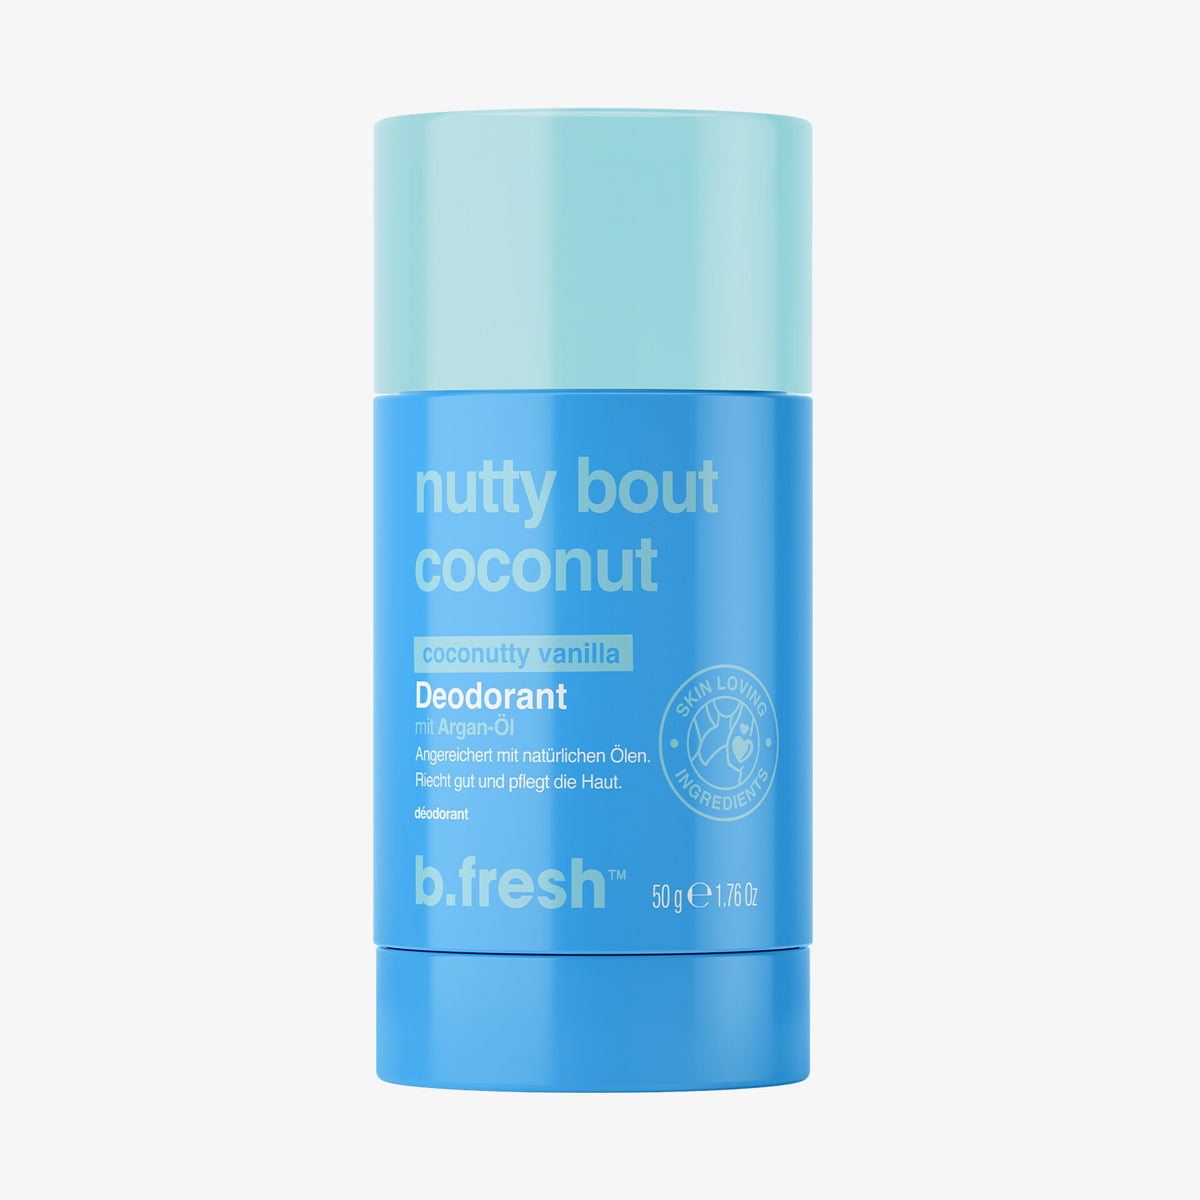 nutty bout coconut - deodorant